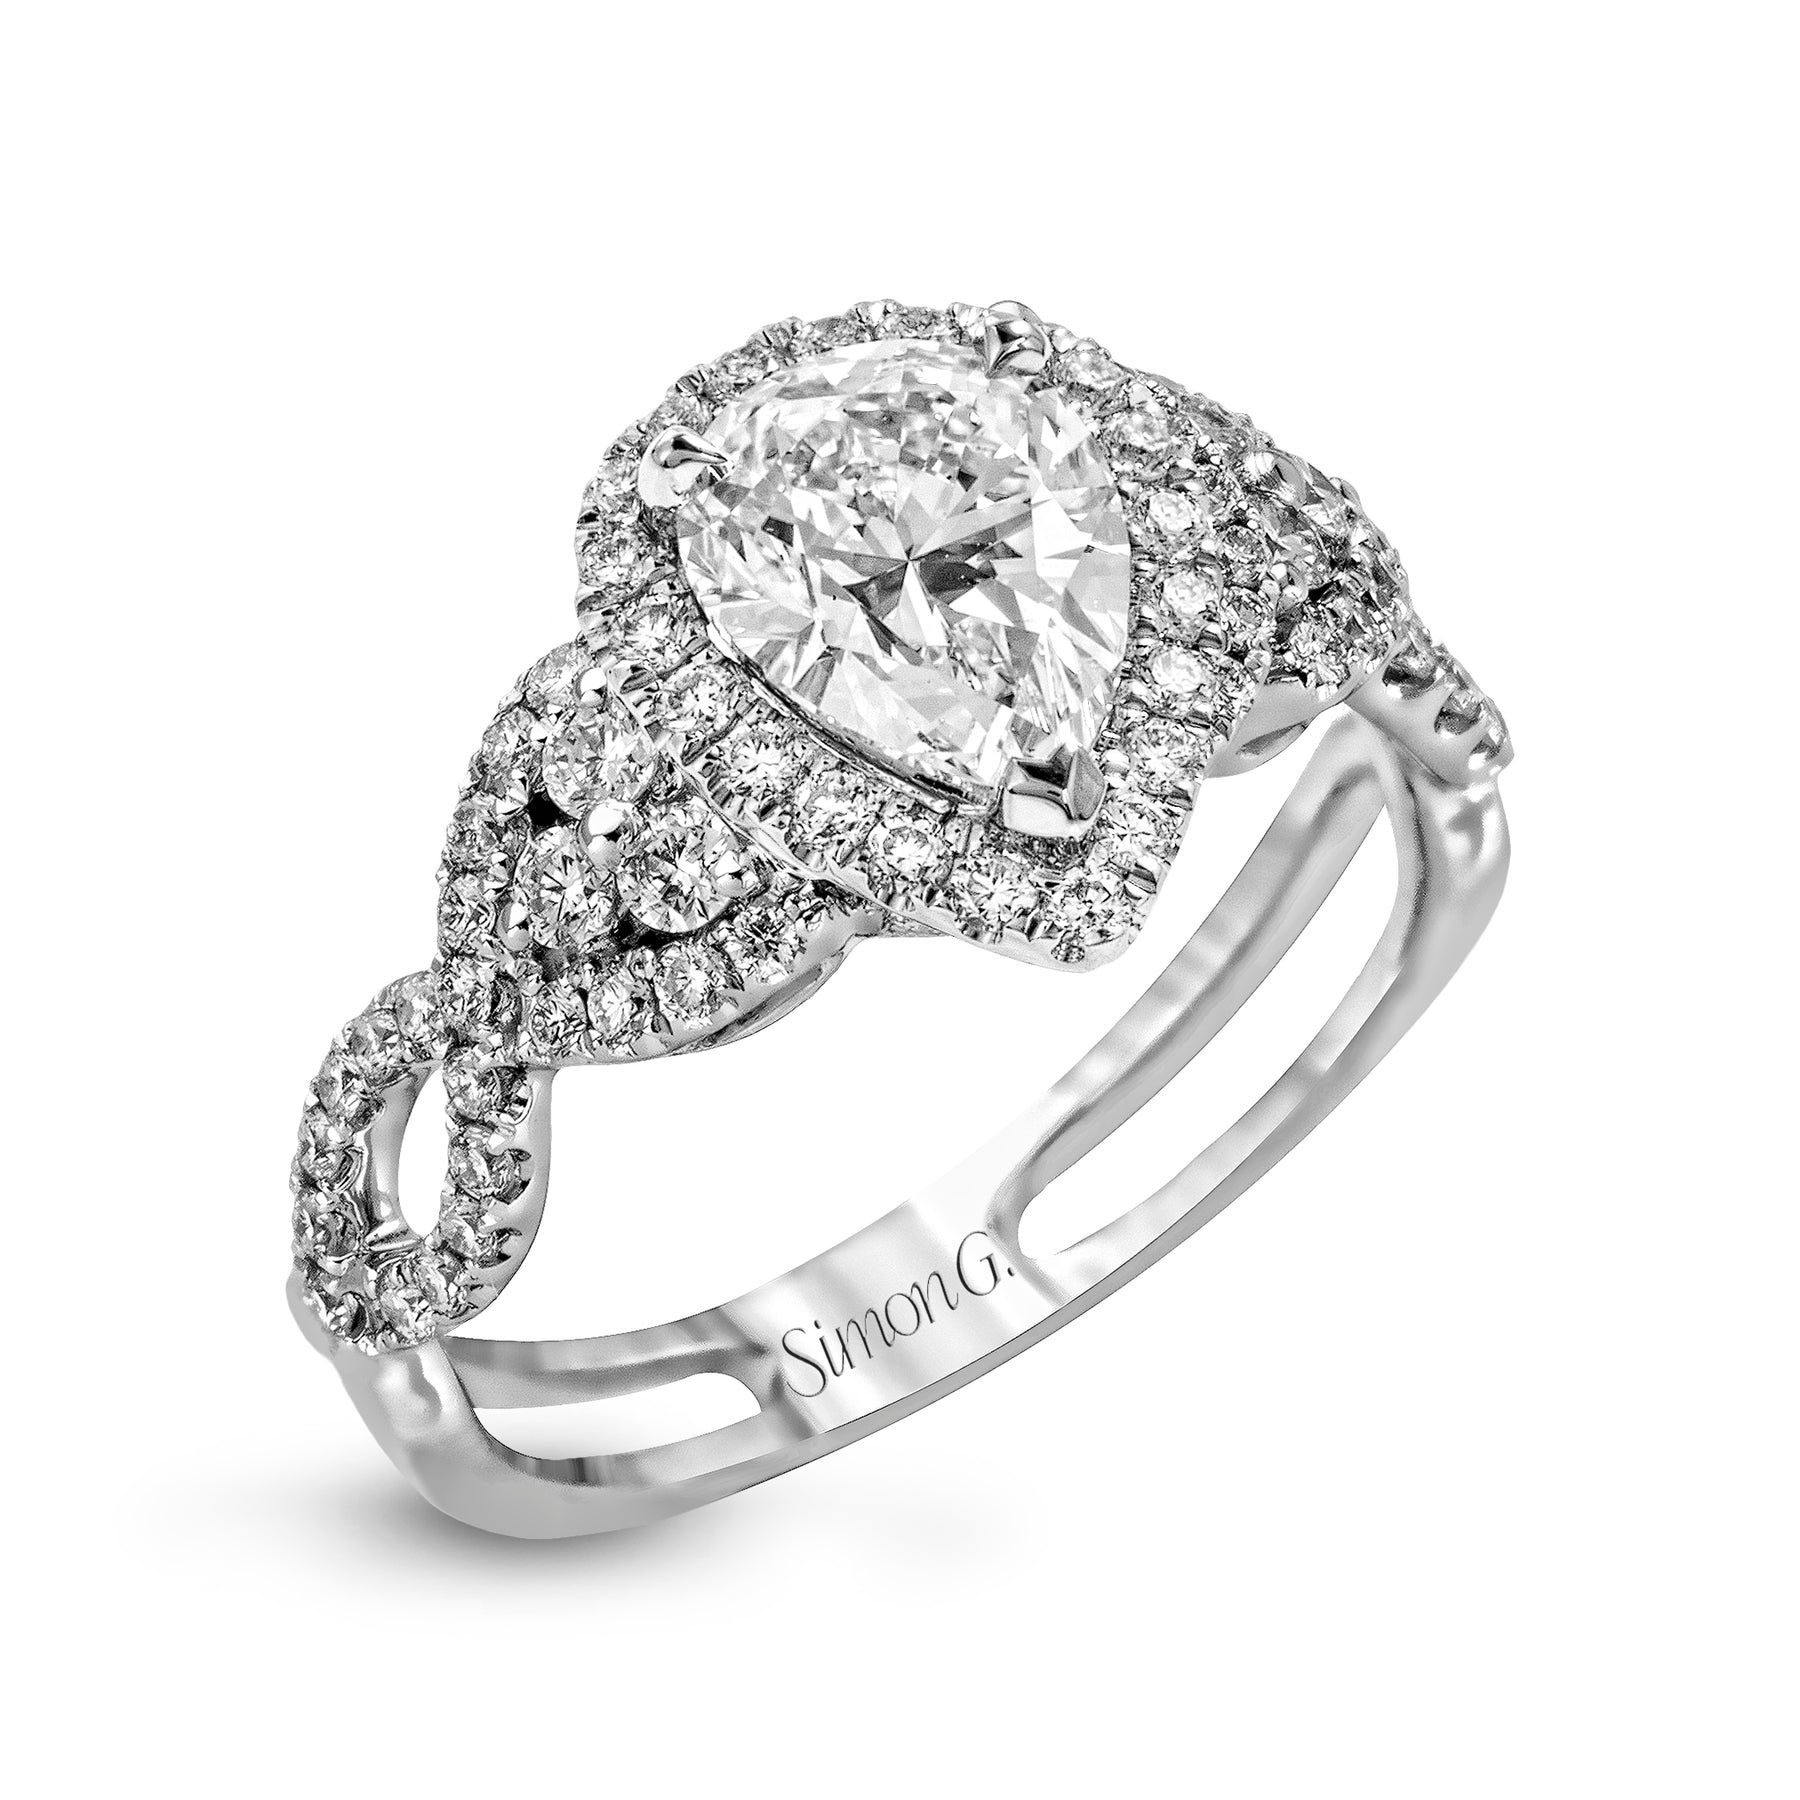 Pear-Cut Halo Engagement Ring In 18k Gold With Diamonds TR160-PR